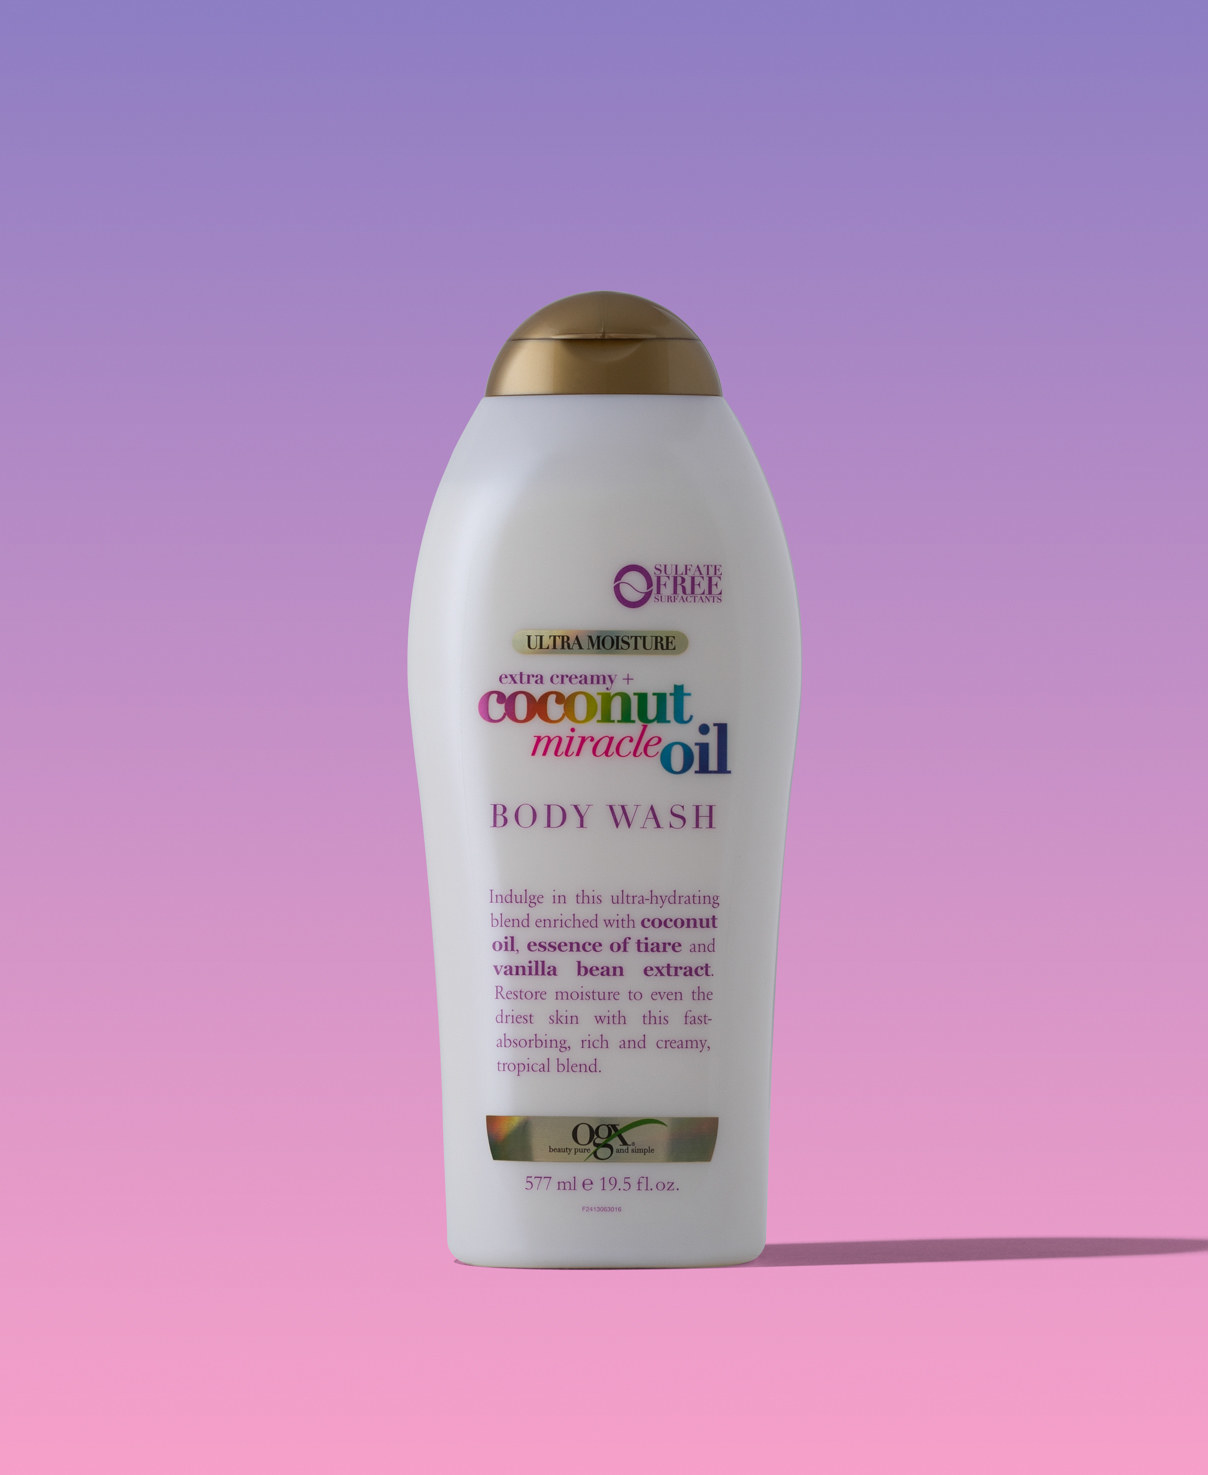 the body wash against a plain background